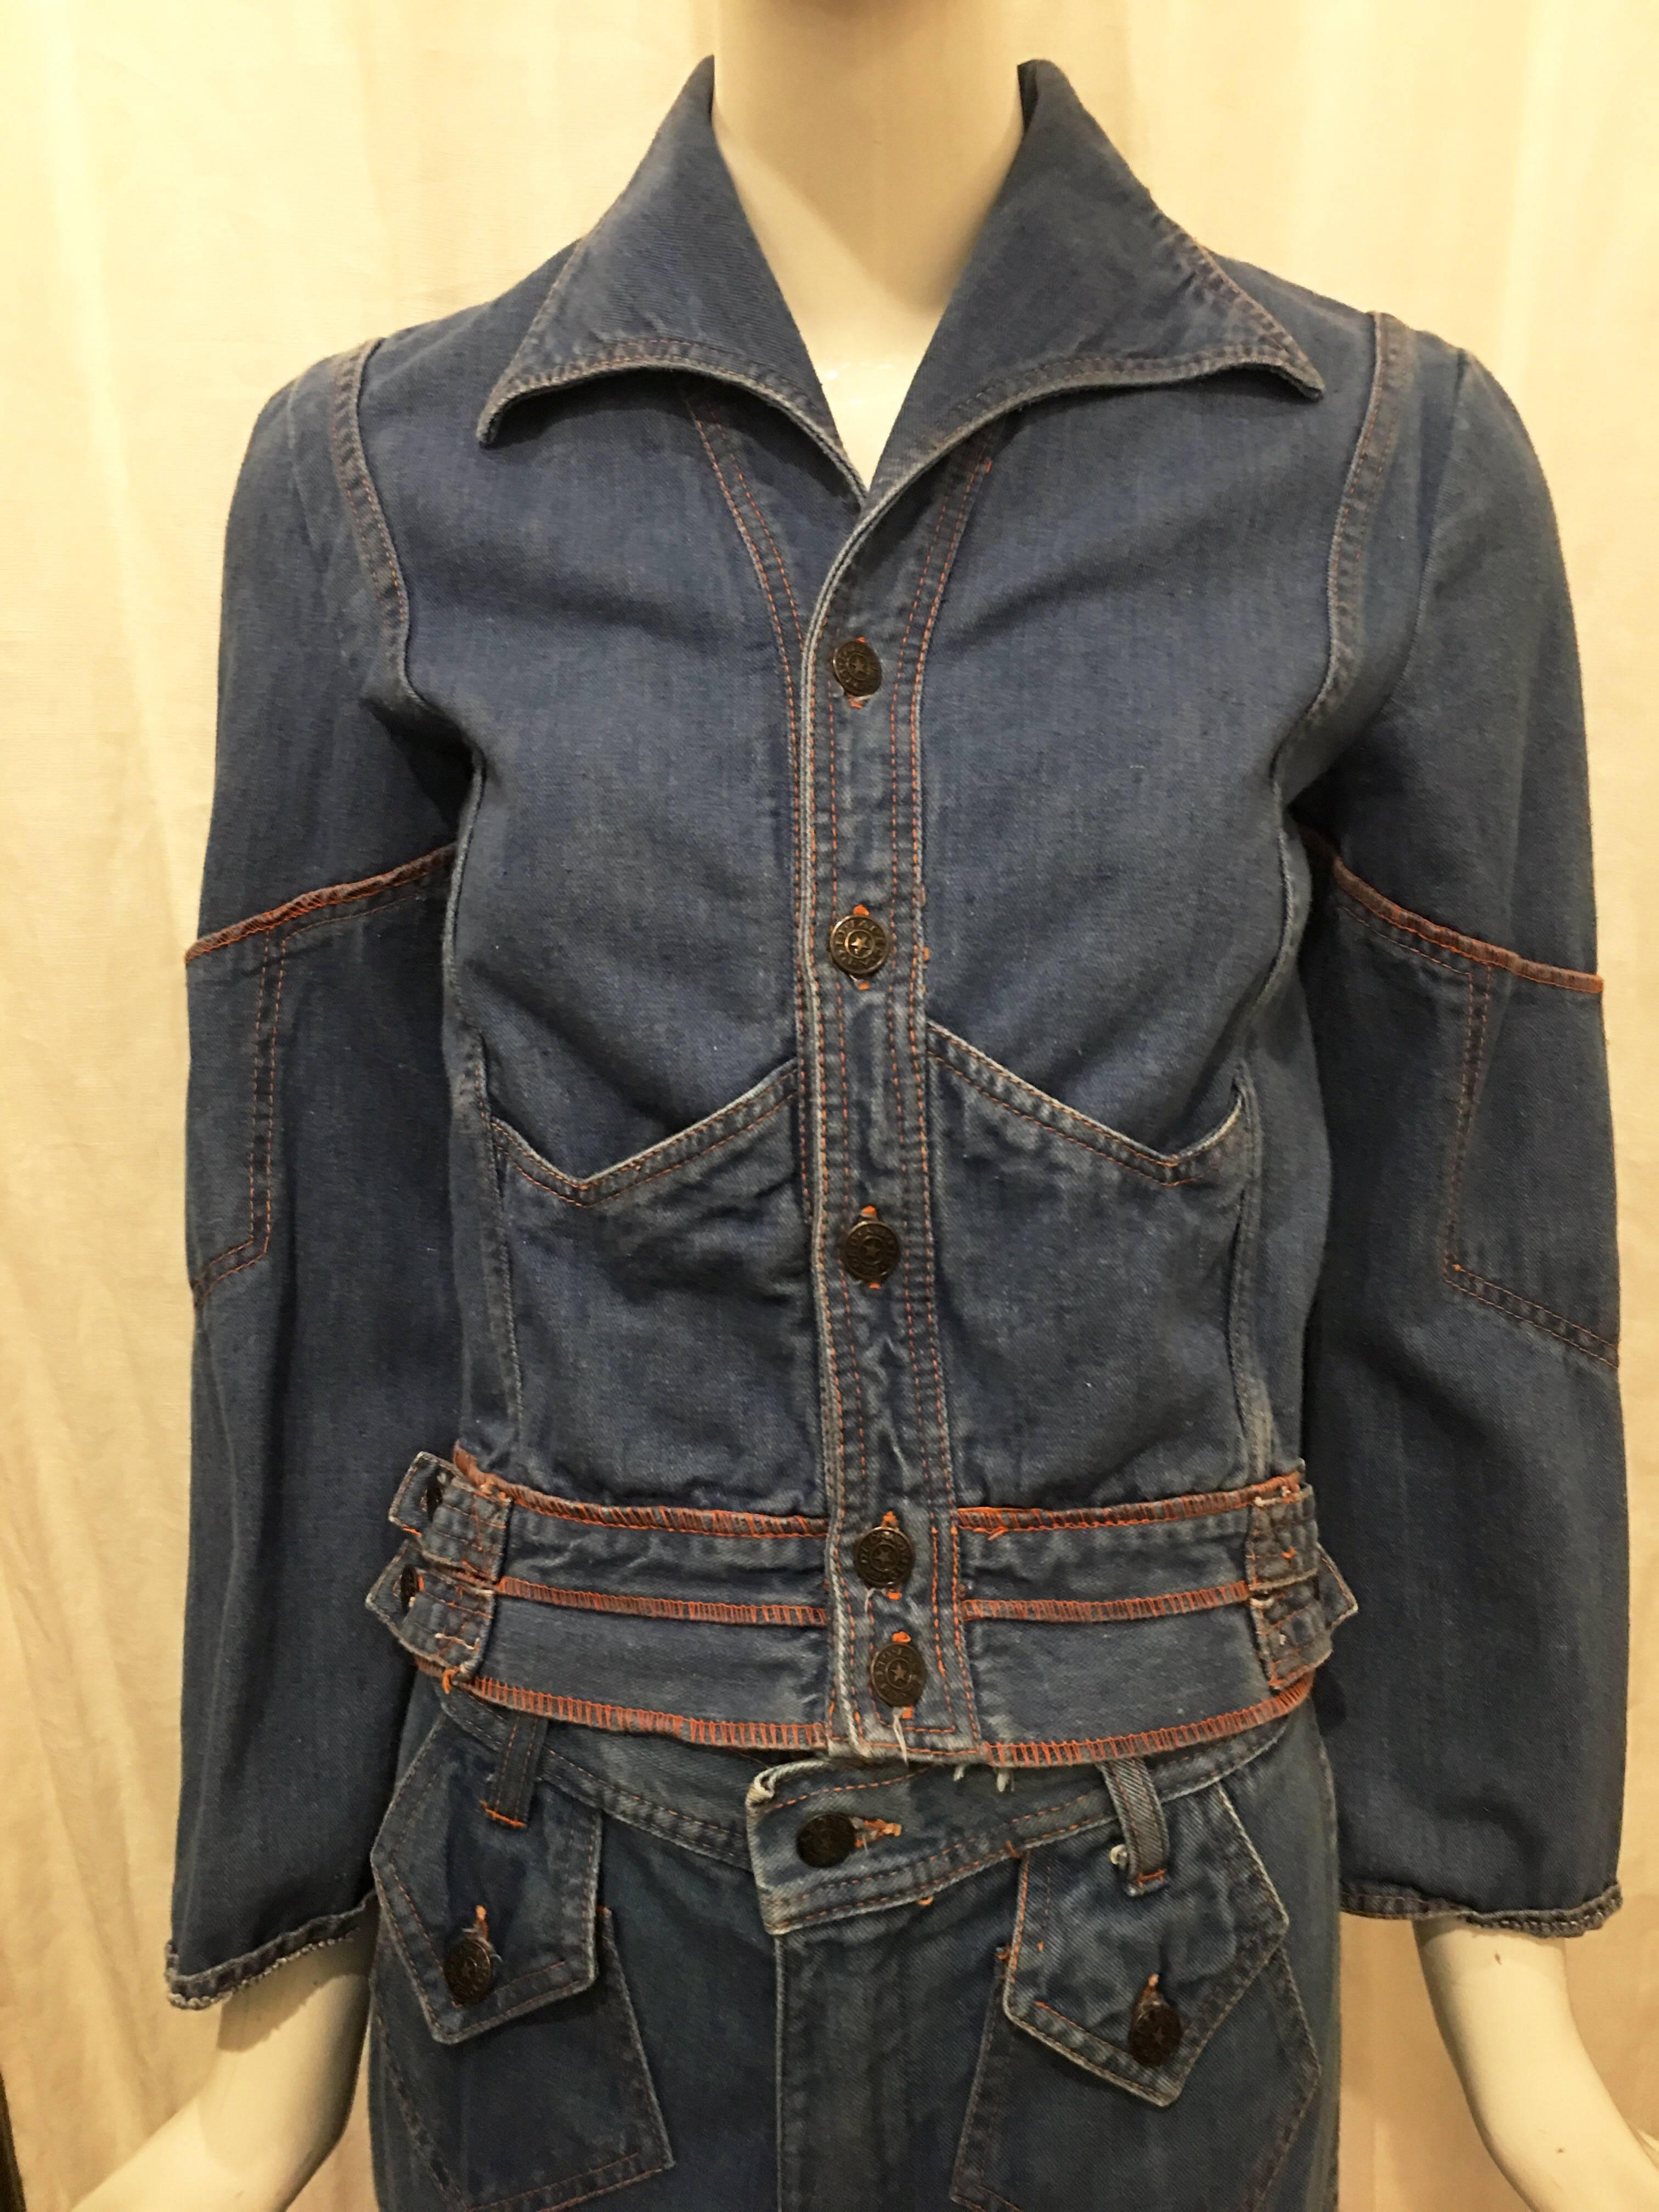 Denim jacket and jean two piece pant suit with embroidered tree and sun print on the top back and back waistline of the top and pants. Button with zip fly closure on jeans. Two button closure pentagon shaped pockets. No pockets at back of jeans. 5